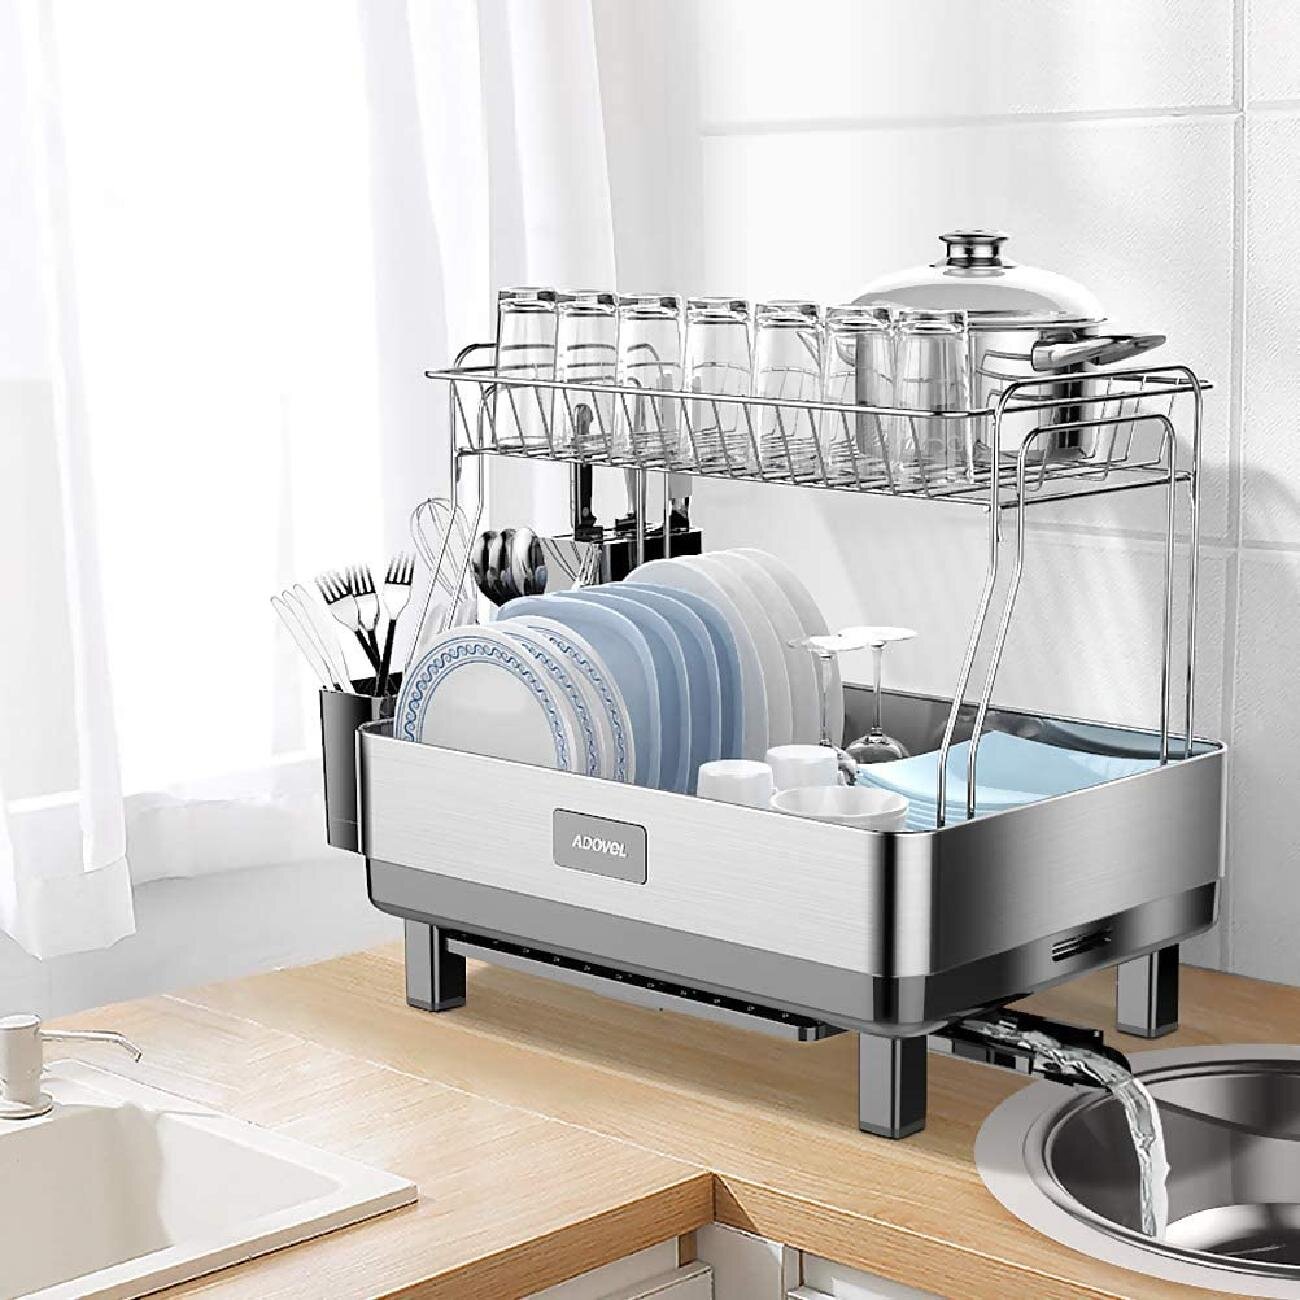 Drying Stainless Steel 2 Tier Dish Rack